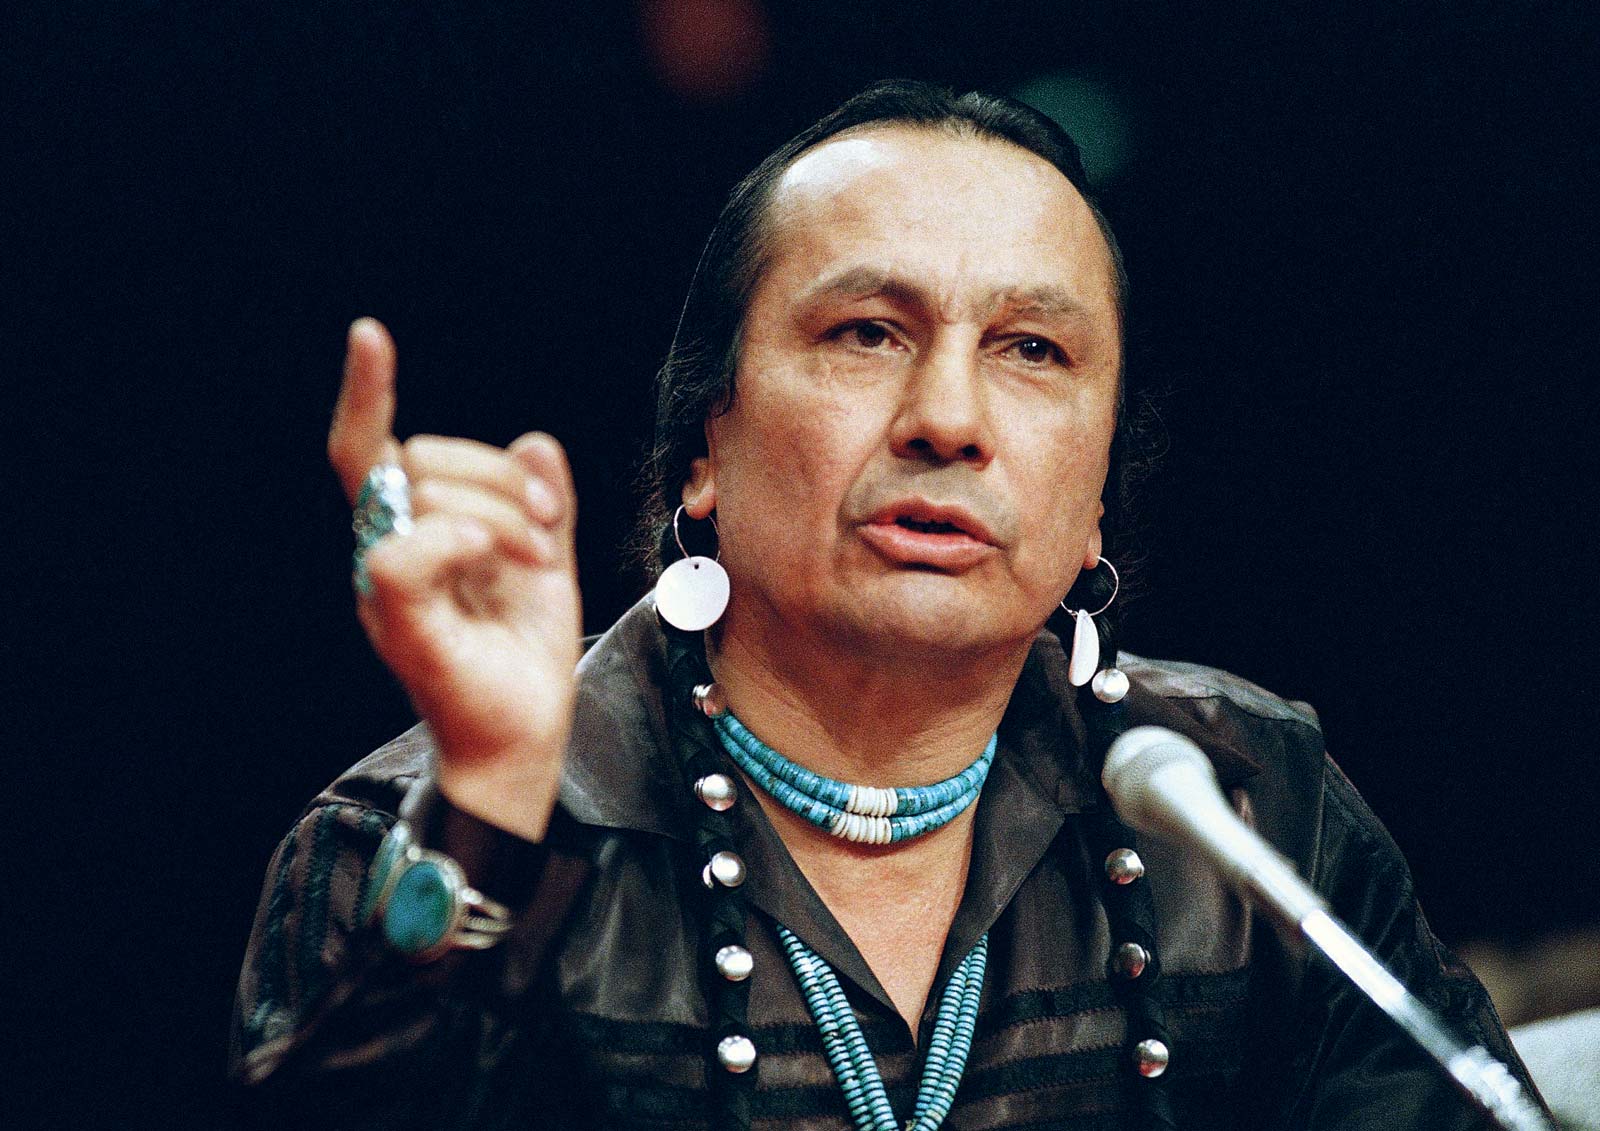 Color photograph of Russell Means wearing turquoise jewelry and speaking into a microphone.